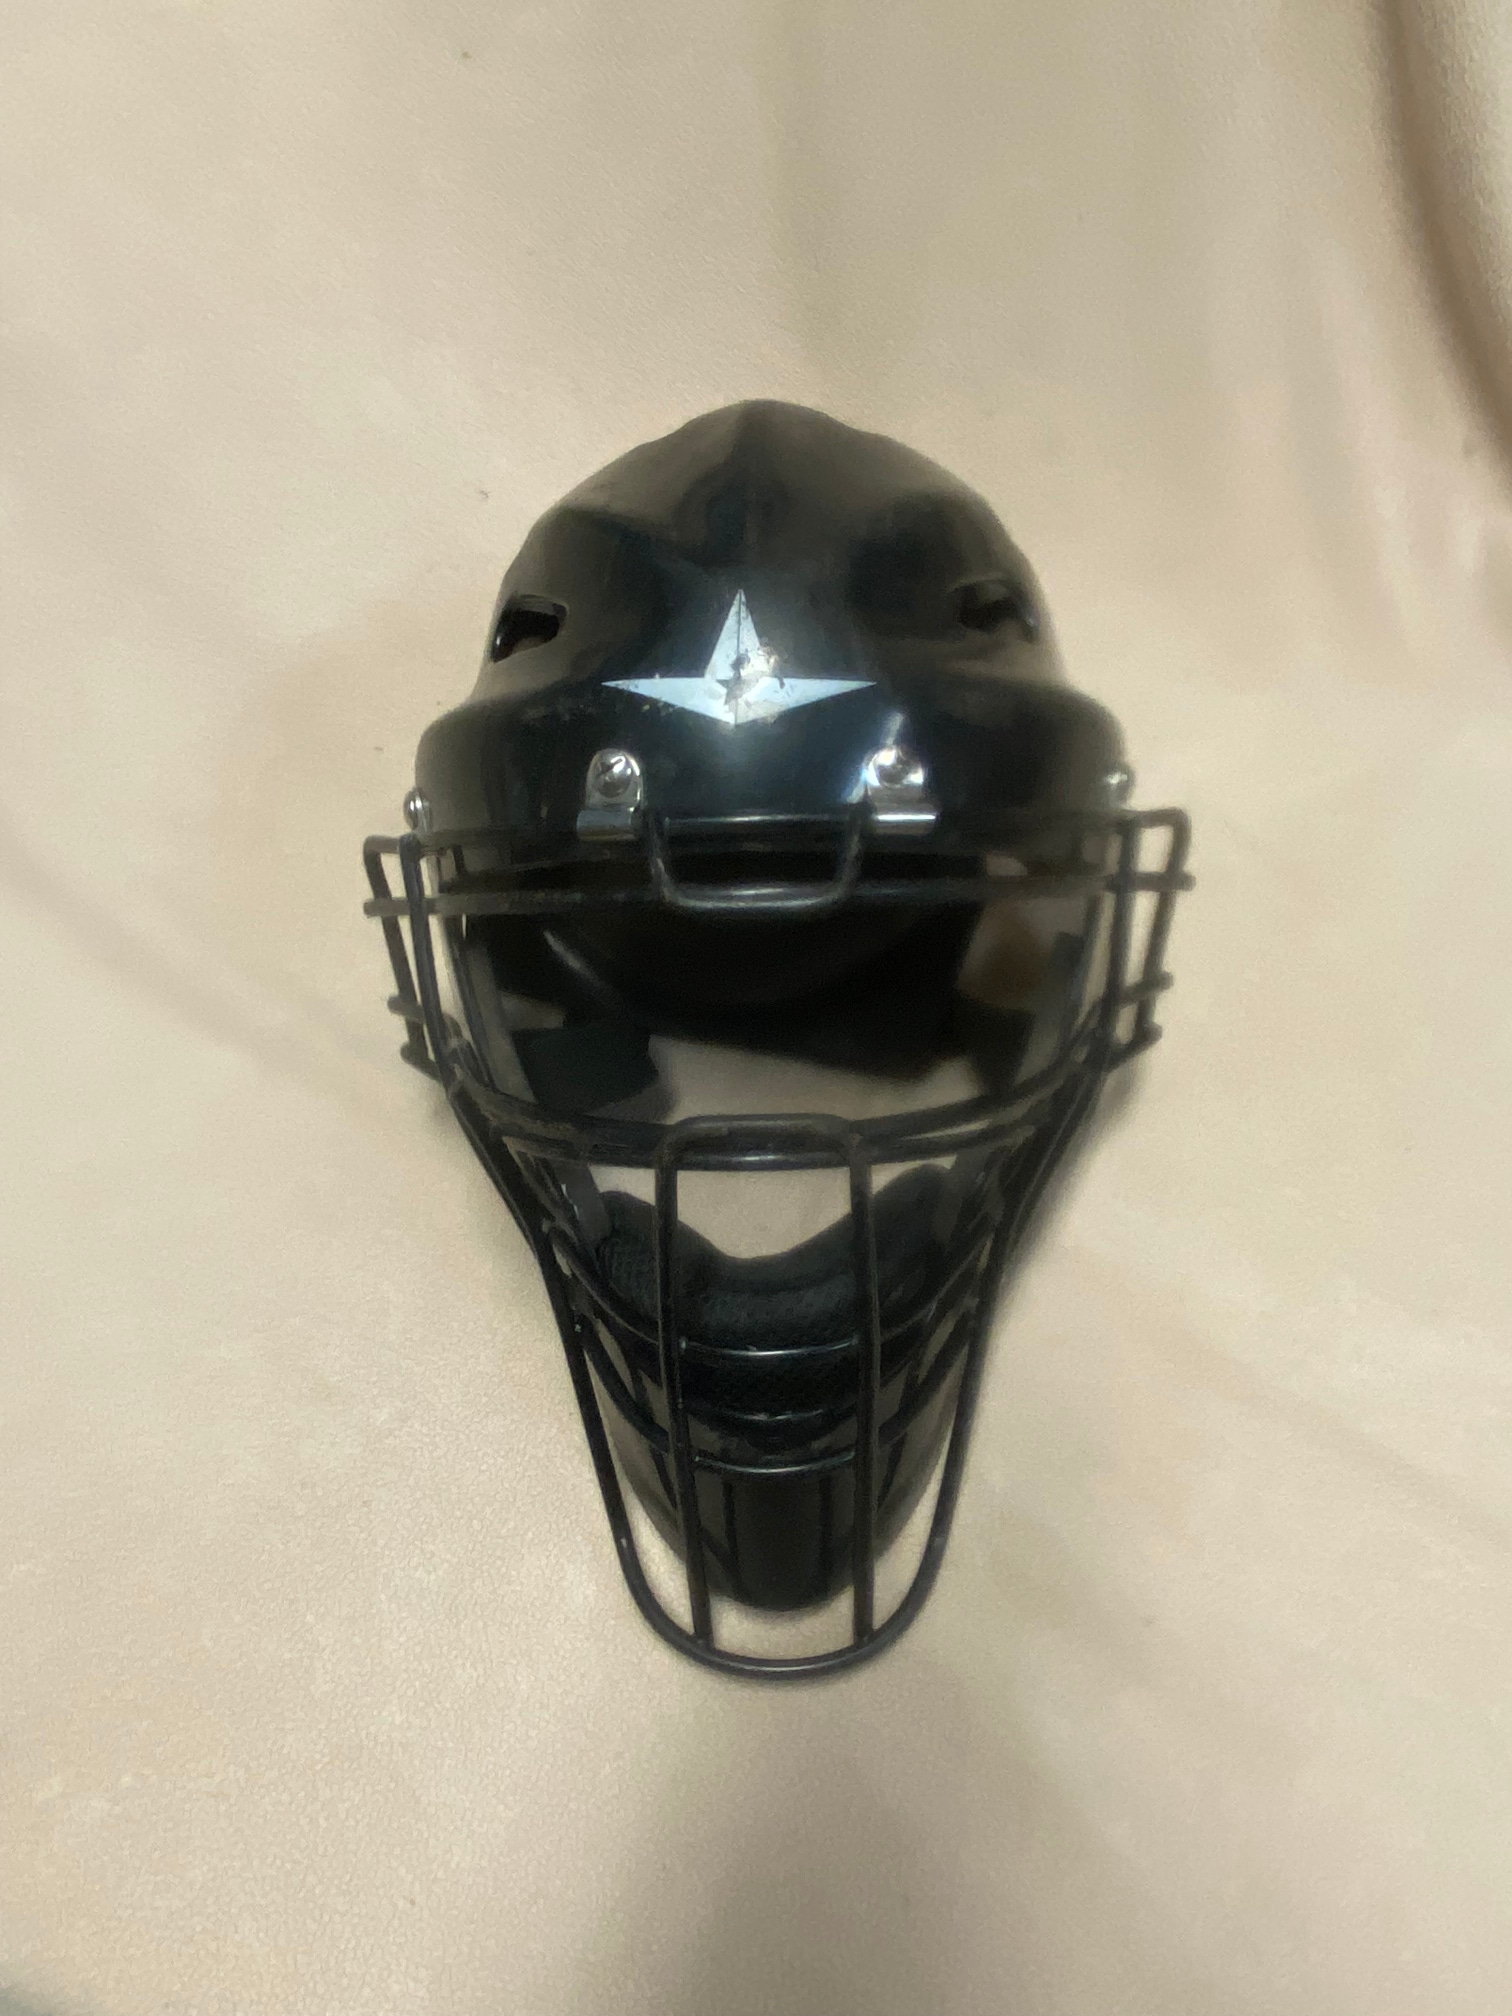 Used All Star MVP2310 Catcher's Mask size 6.25-7